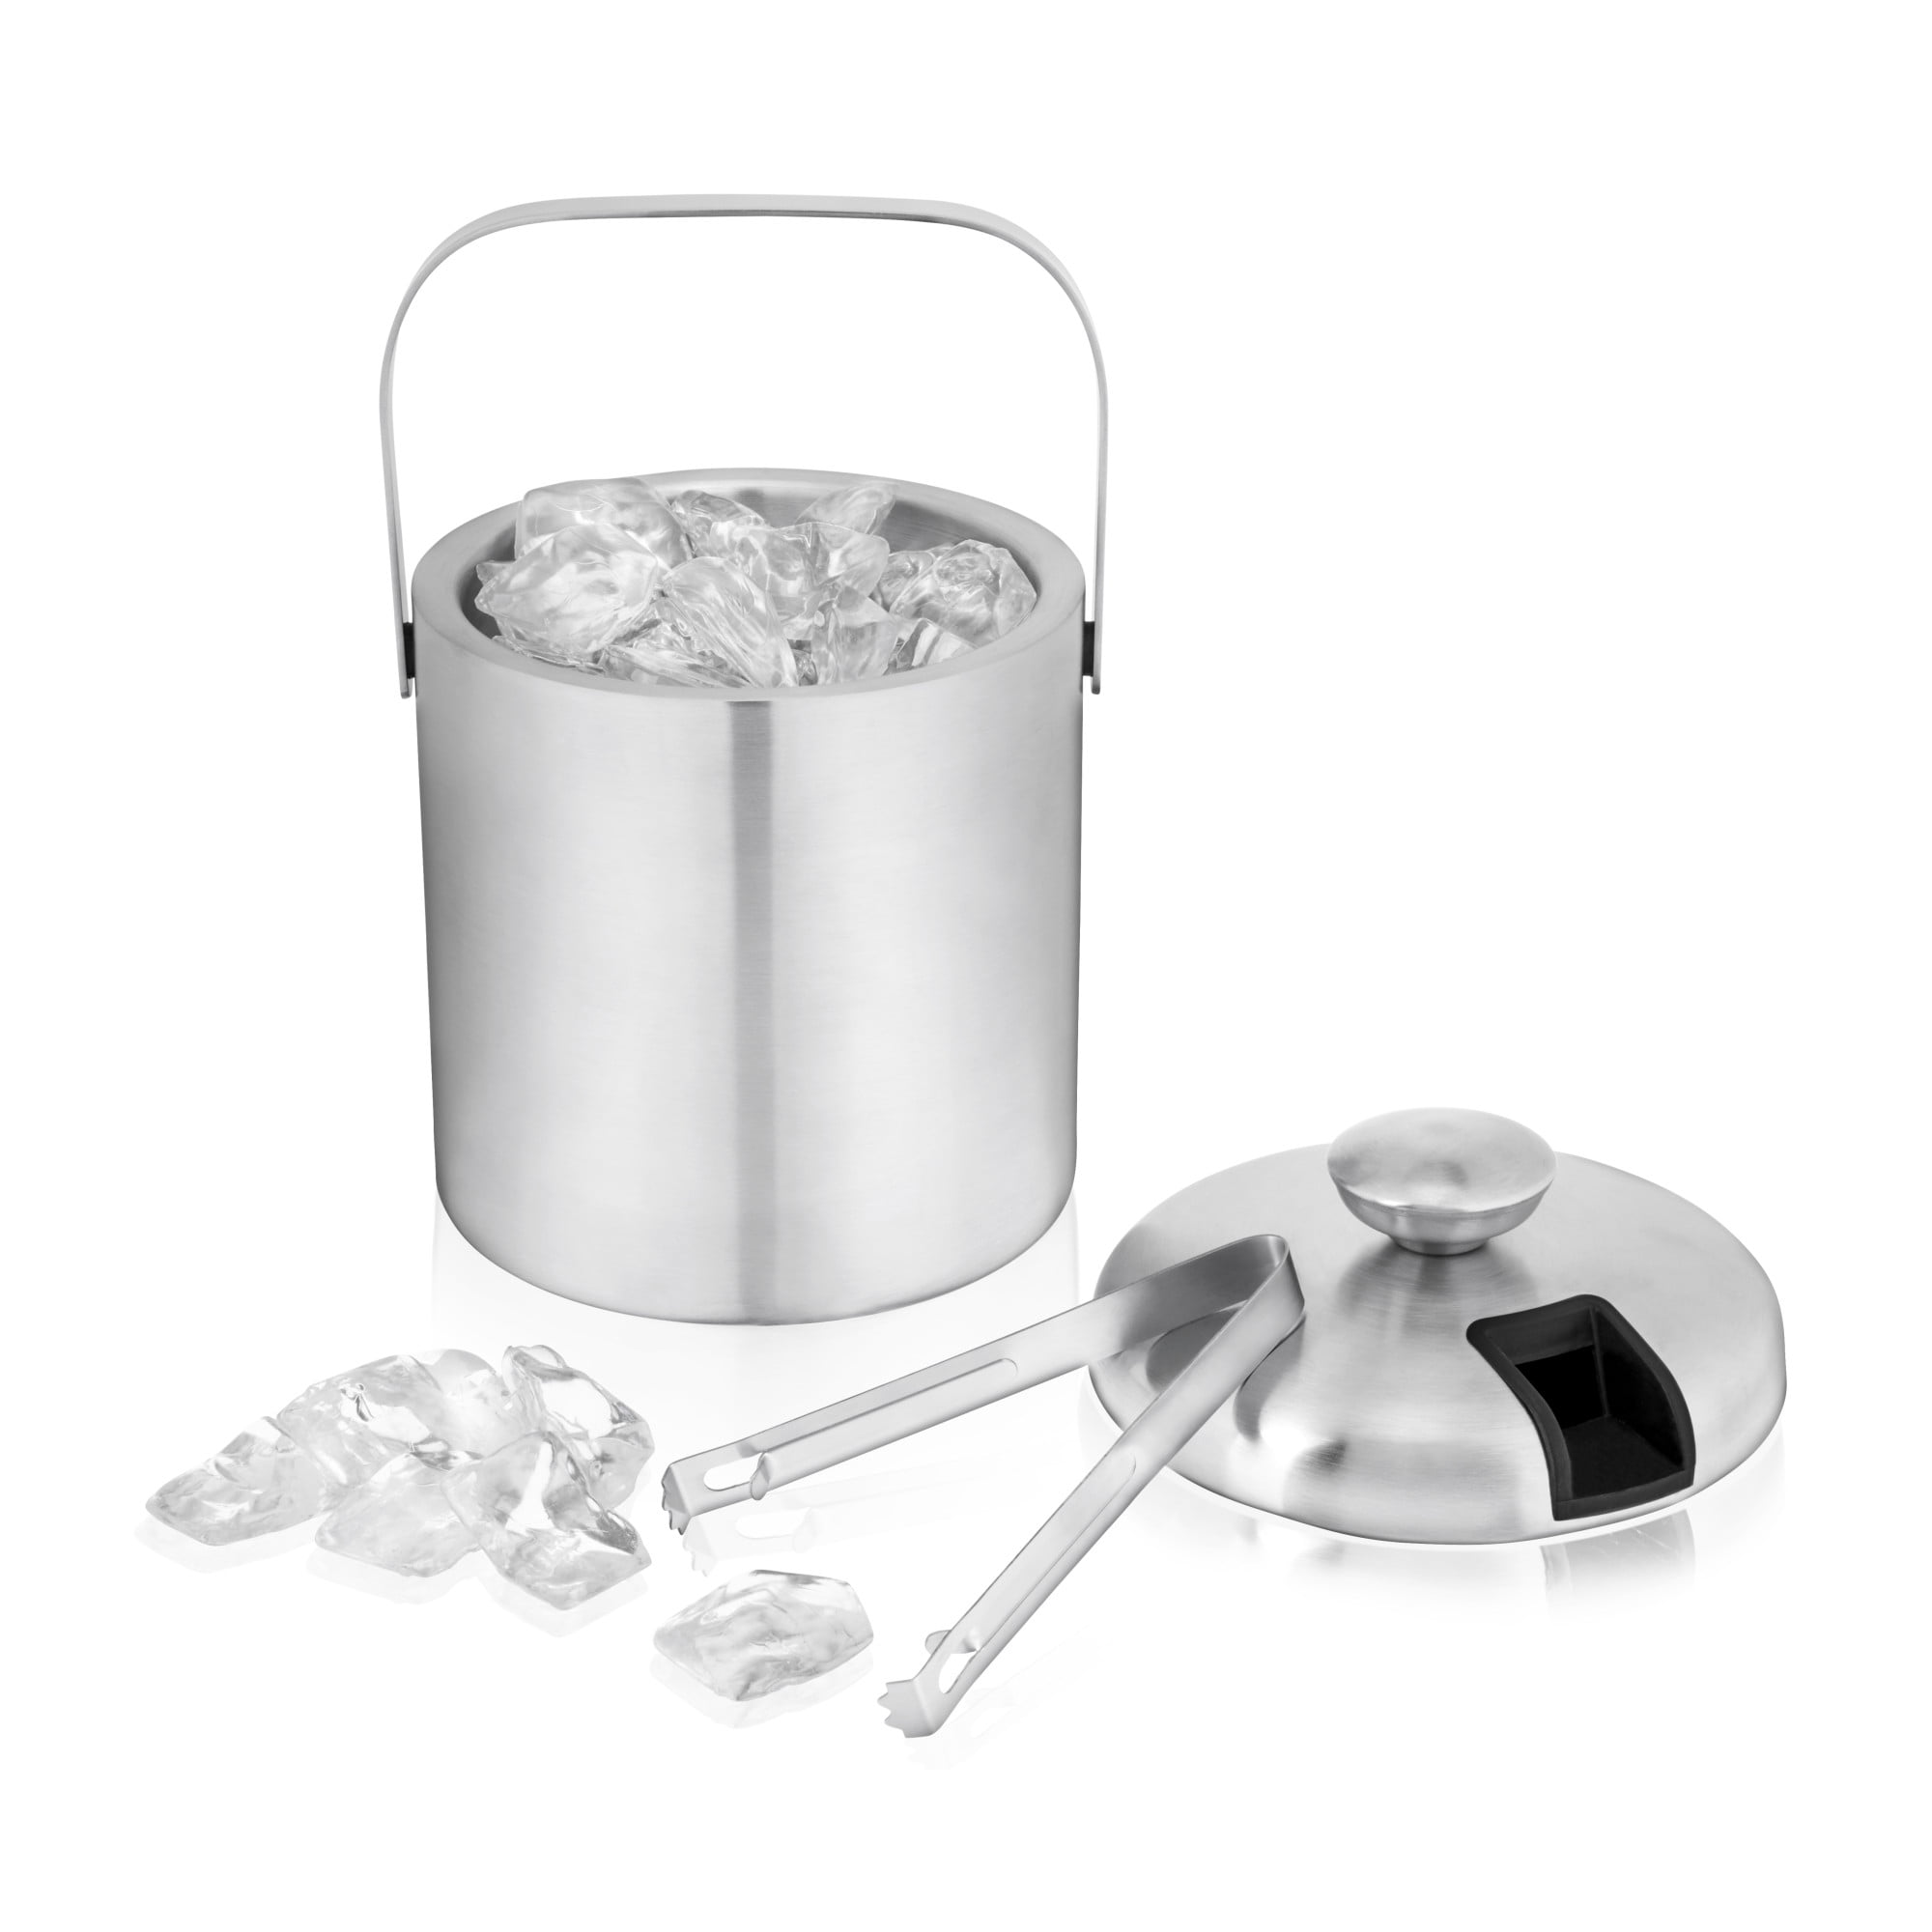 Bar Accessories King International 100% Stainless Steel Double Walled Insulated Ice Bucket with Tong Bar Tools Ideal for Party Get together and Gifting 1750 ml 